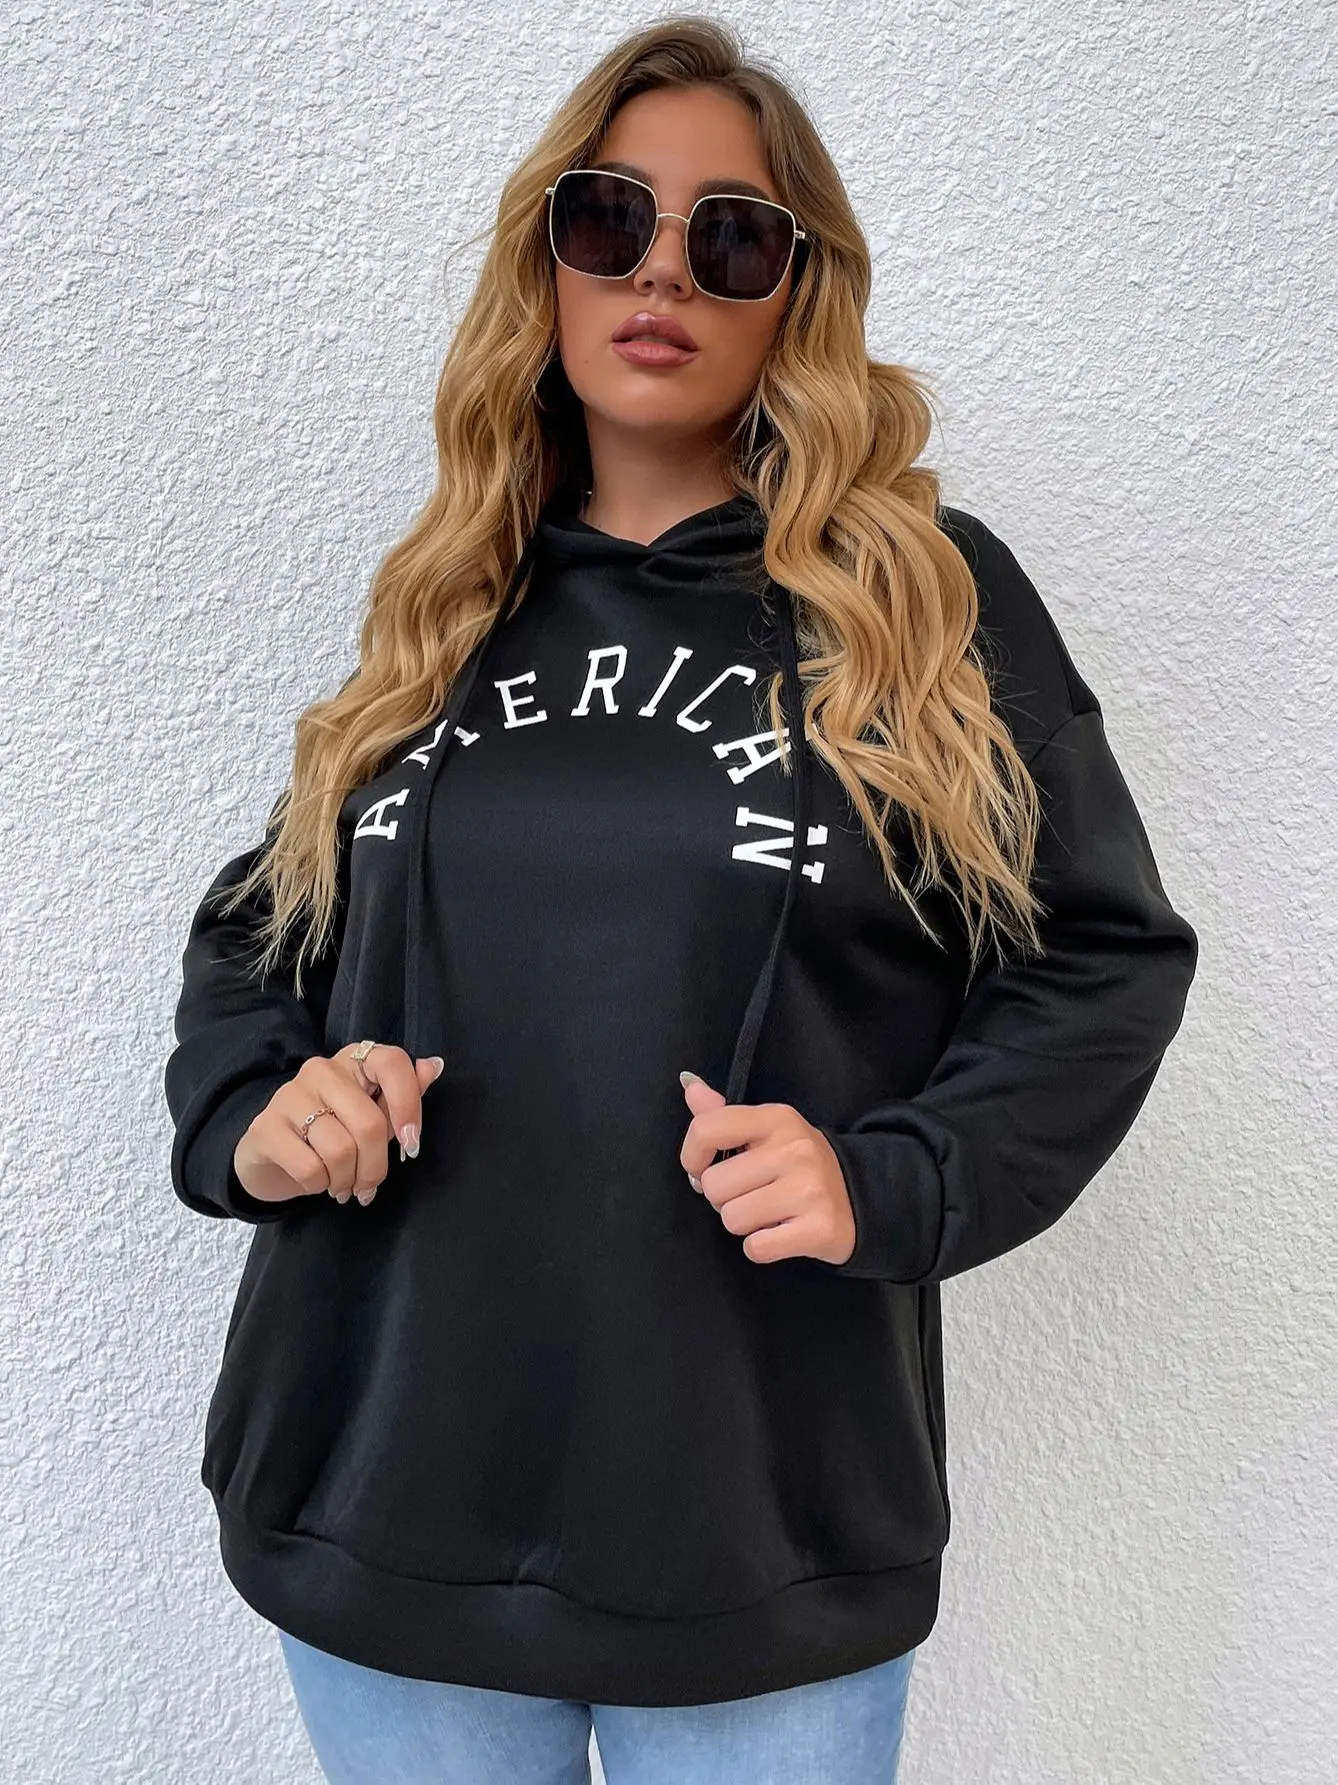 4xl Plus Size Hooded Sweatshirts for Women Ladies Autumn Winter 2022 Large Size Hoodie Oversize Loose Black Pullovers Casual Top